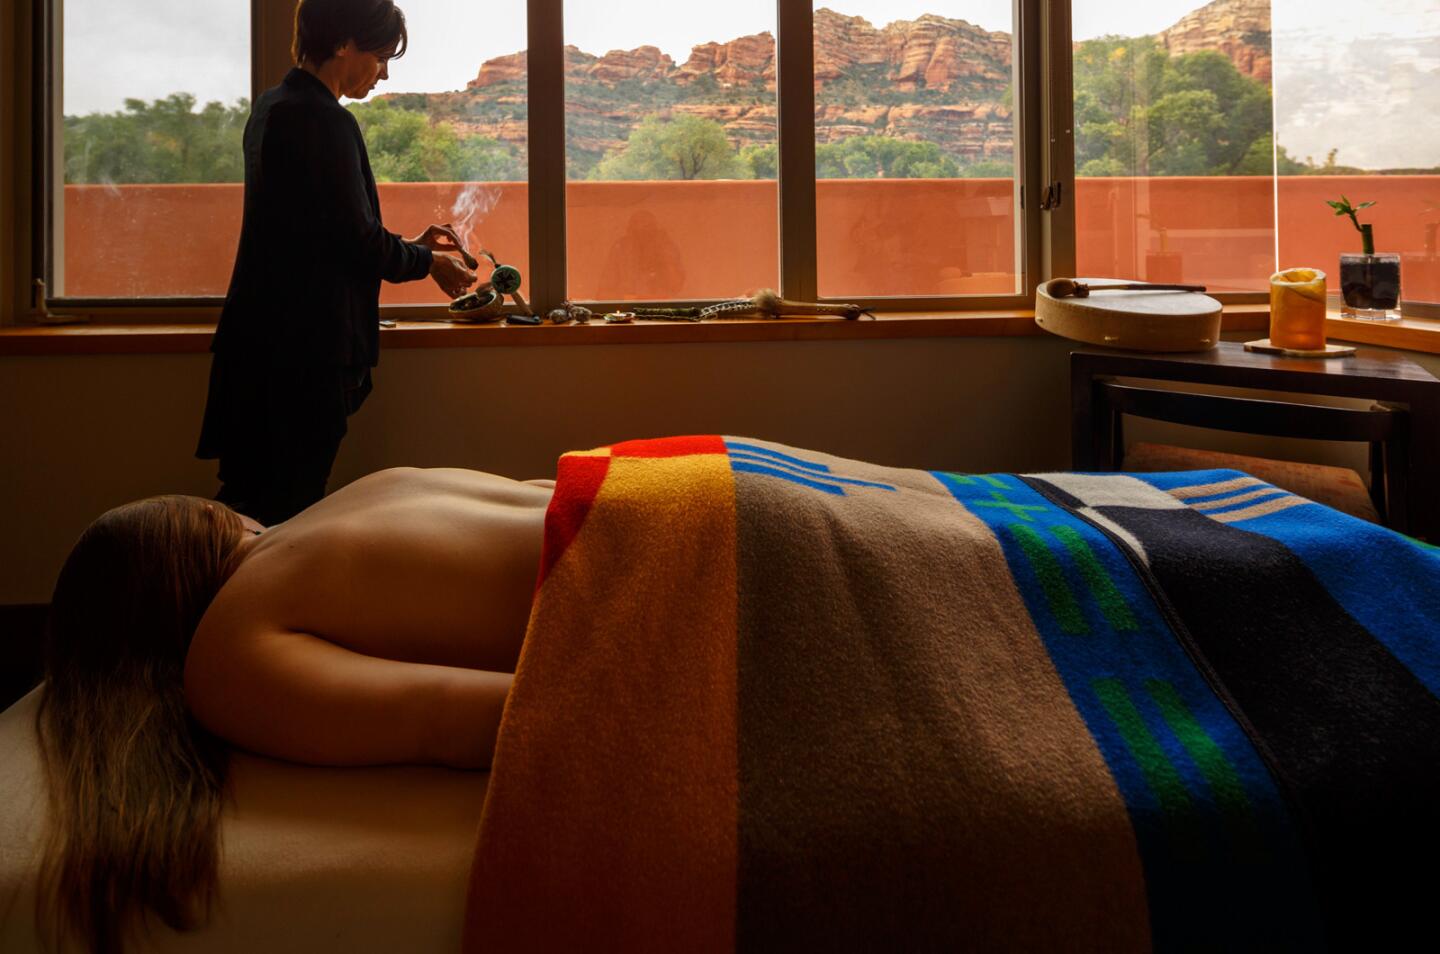 In one of many treatment rooms, a guest enjoys a view of the canyon while awaiting the Inner Quest treatment. The therapist is burning sage to cleanse the energy in the room.